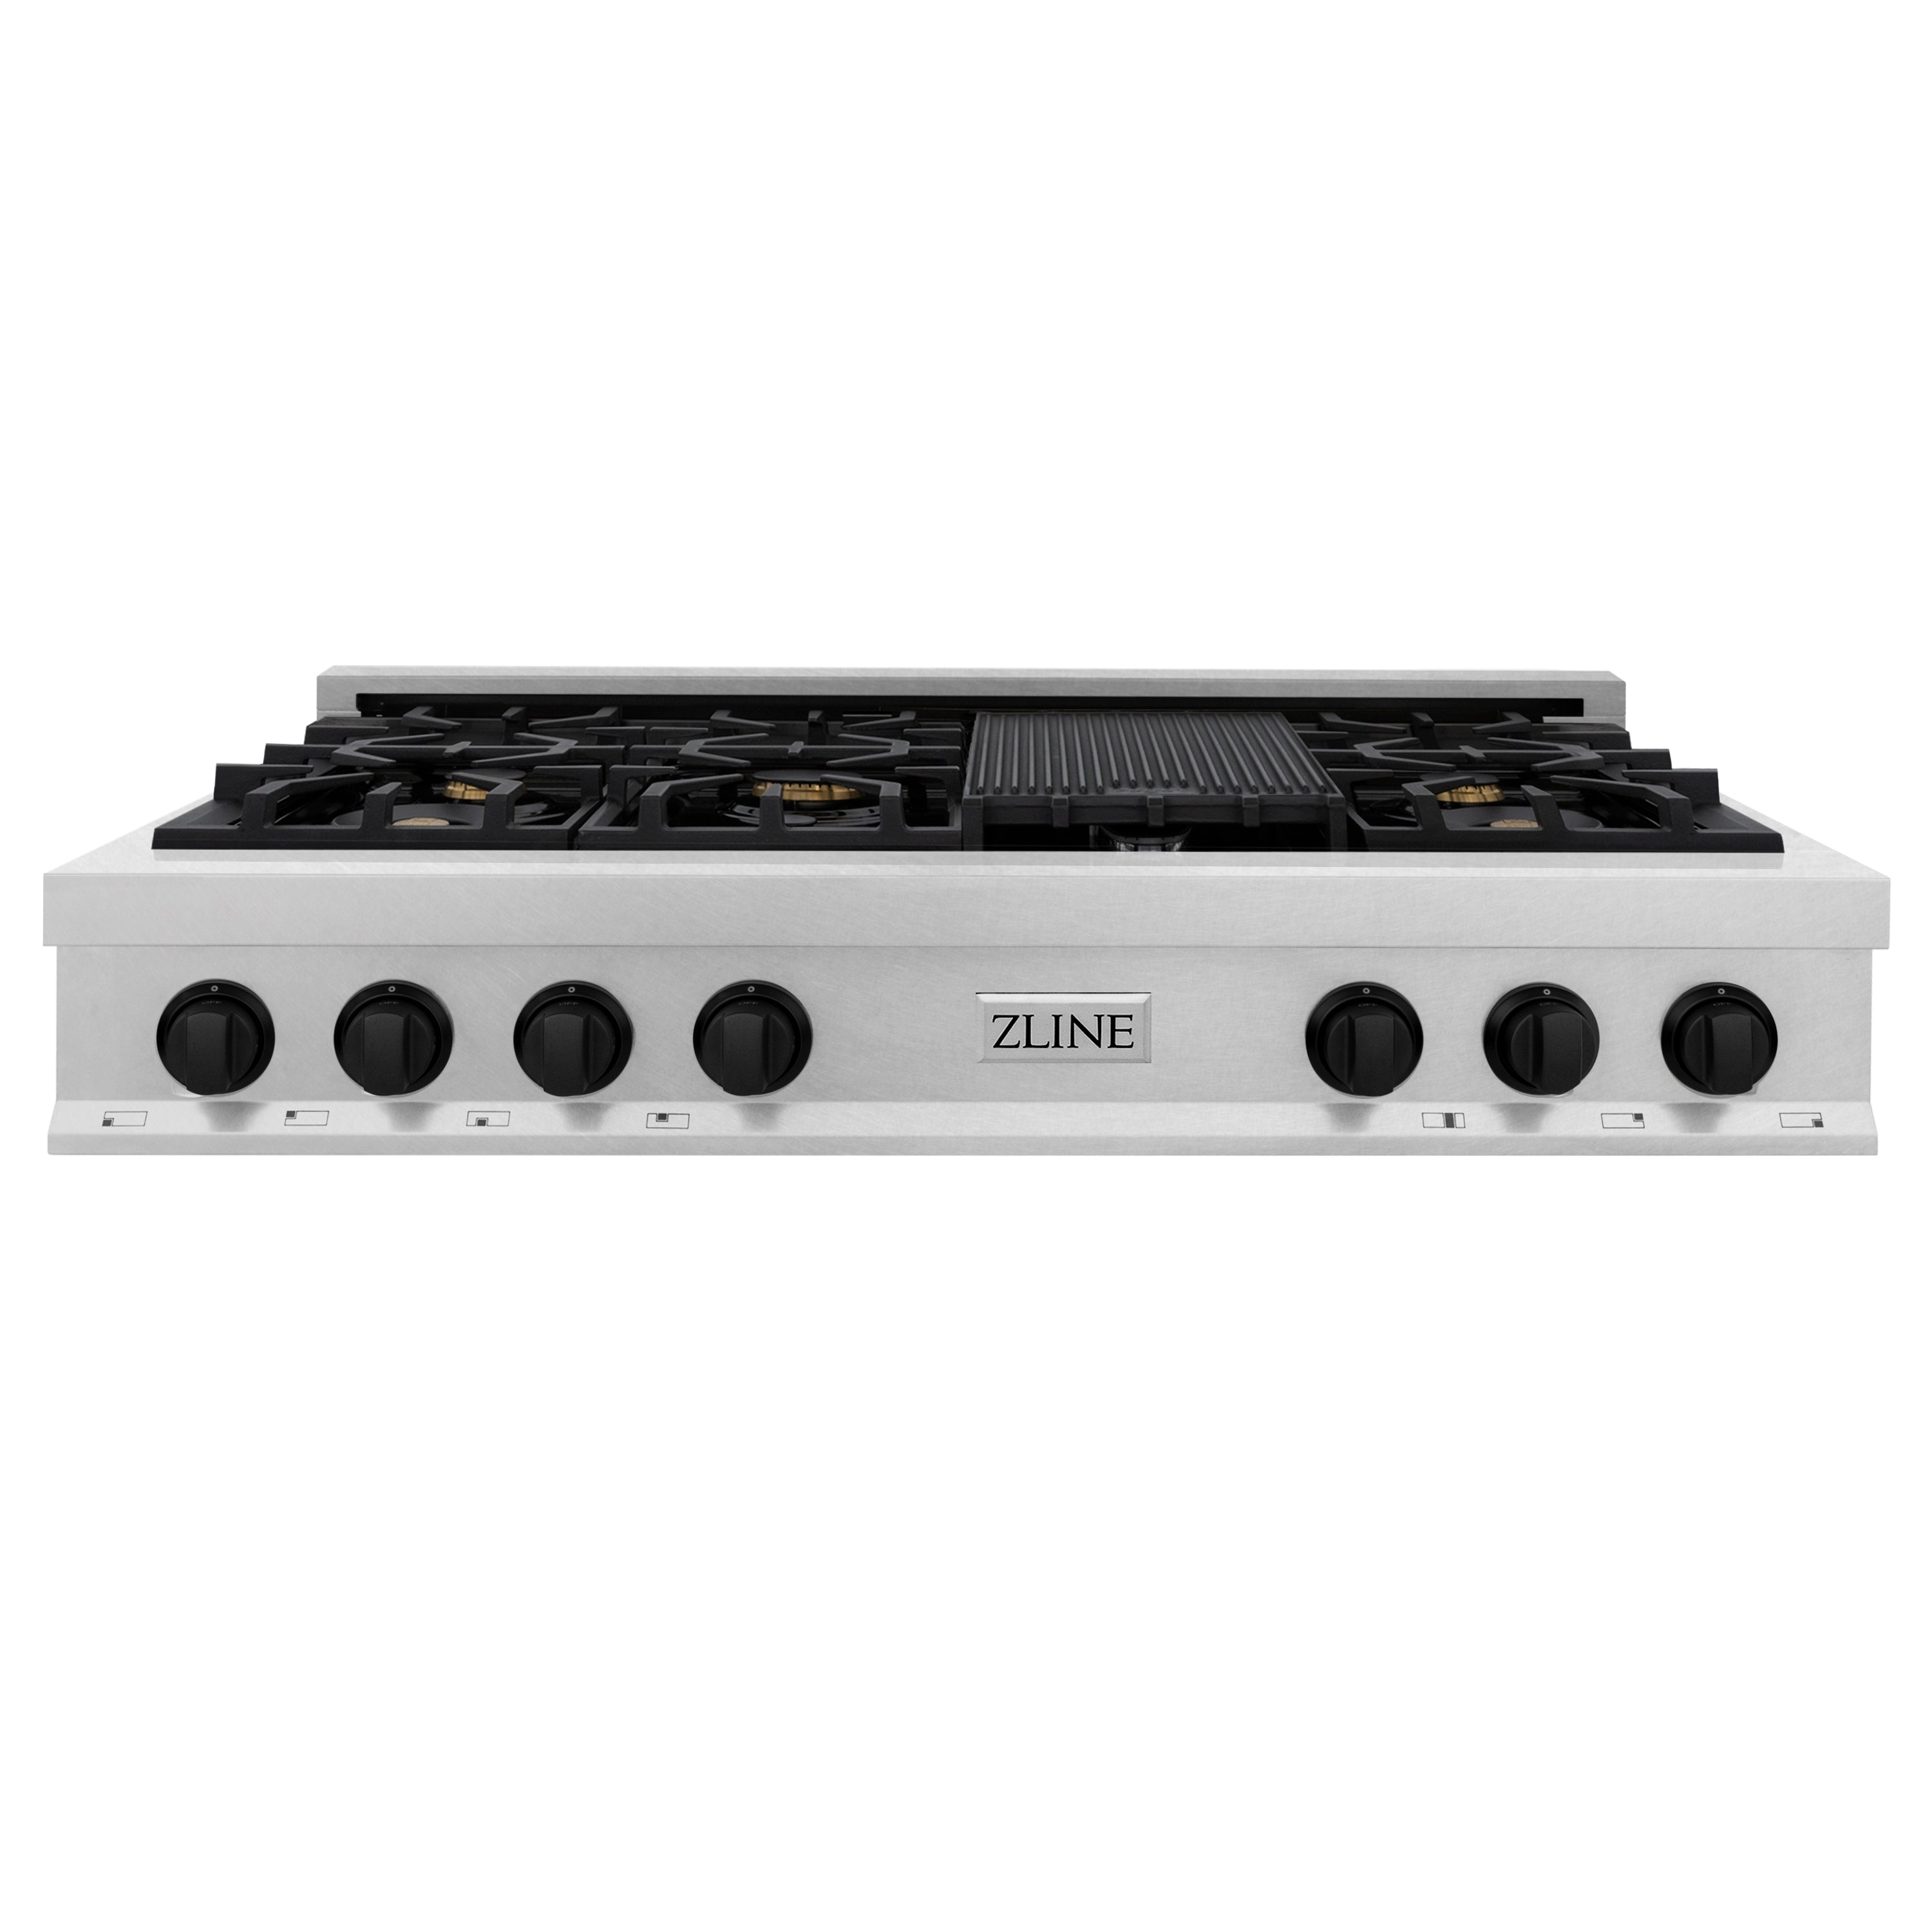 ZLINE Autograph Edition 48 in. Porcelain Rangetop with 7 Gas Burners in DuraSnow Stainless Steel and Matte Black Accents (RTSZ-48-MB)